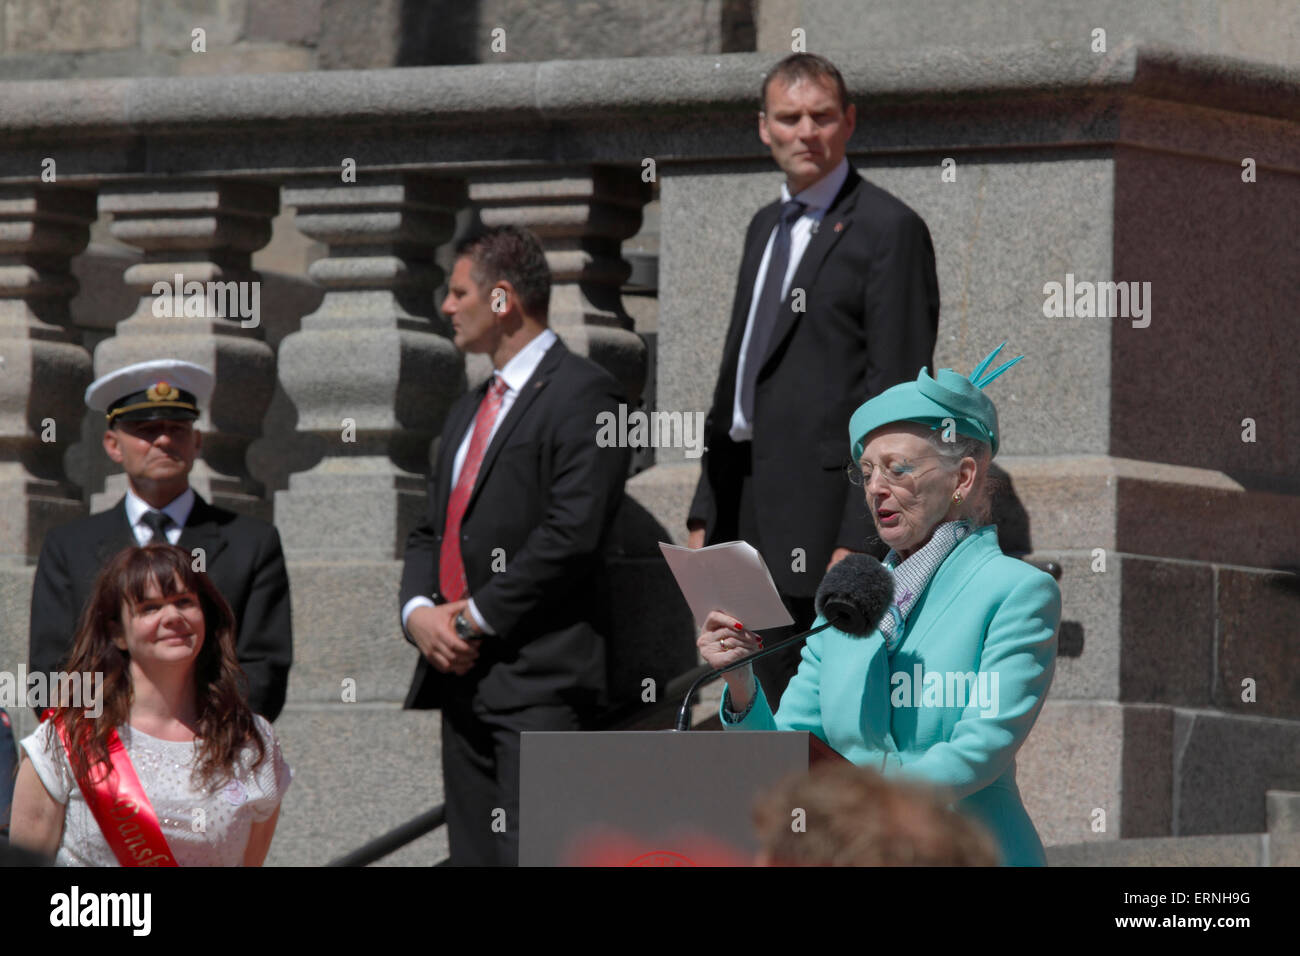 Copenhagen, Denmark, 5th June, 2015. H.M. Queen Margrethe II of Denmark speaks in the Christiansborg Palace yard at the finish point of the commemorative parade in celebration of the 100th anniversary of the constitution that gave Danish women the right to vote and stand for election. The parade showed historic garments that would have been worn in the original parade in 1915. Credit:  Niels Quist/Alamy Live News Stock Photo